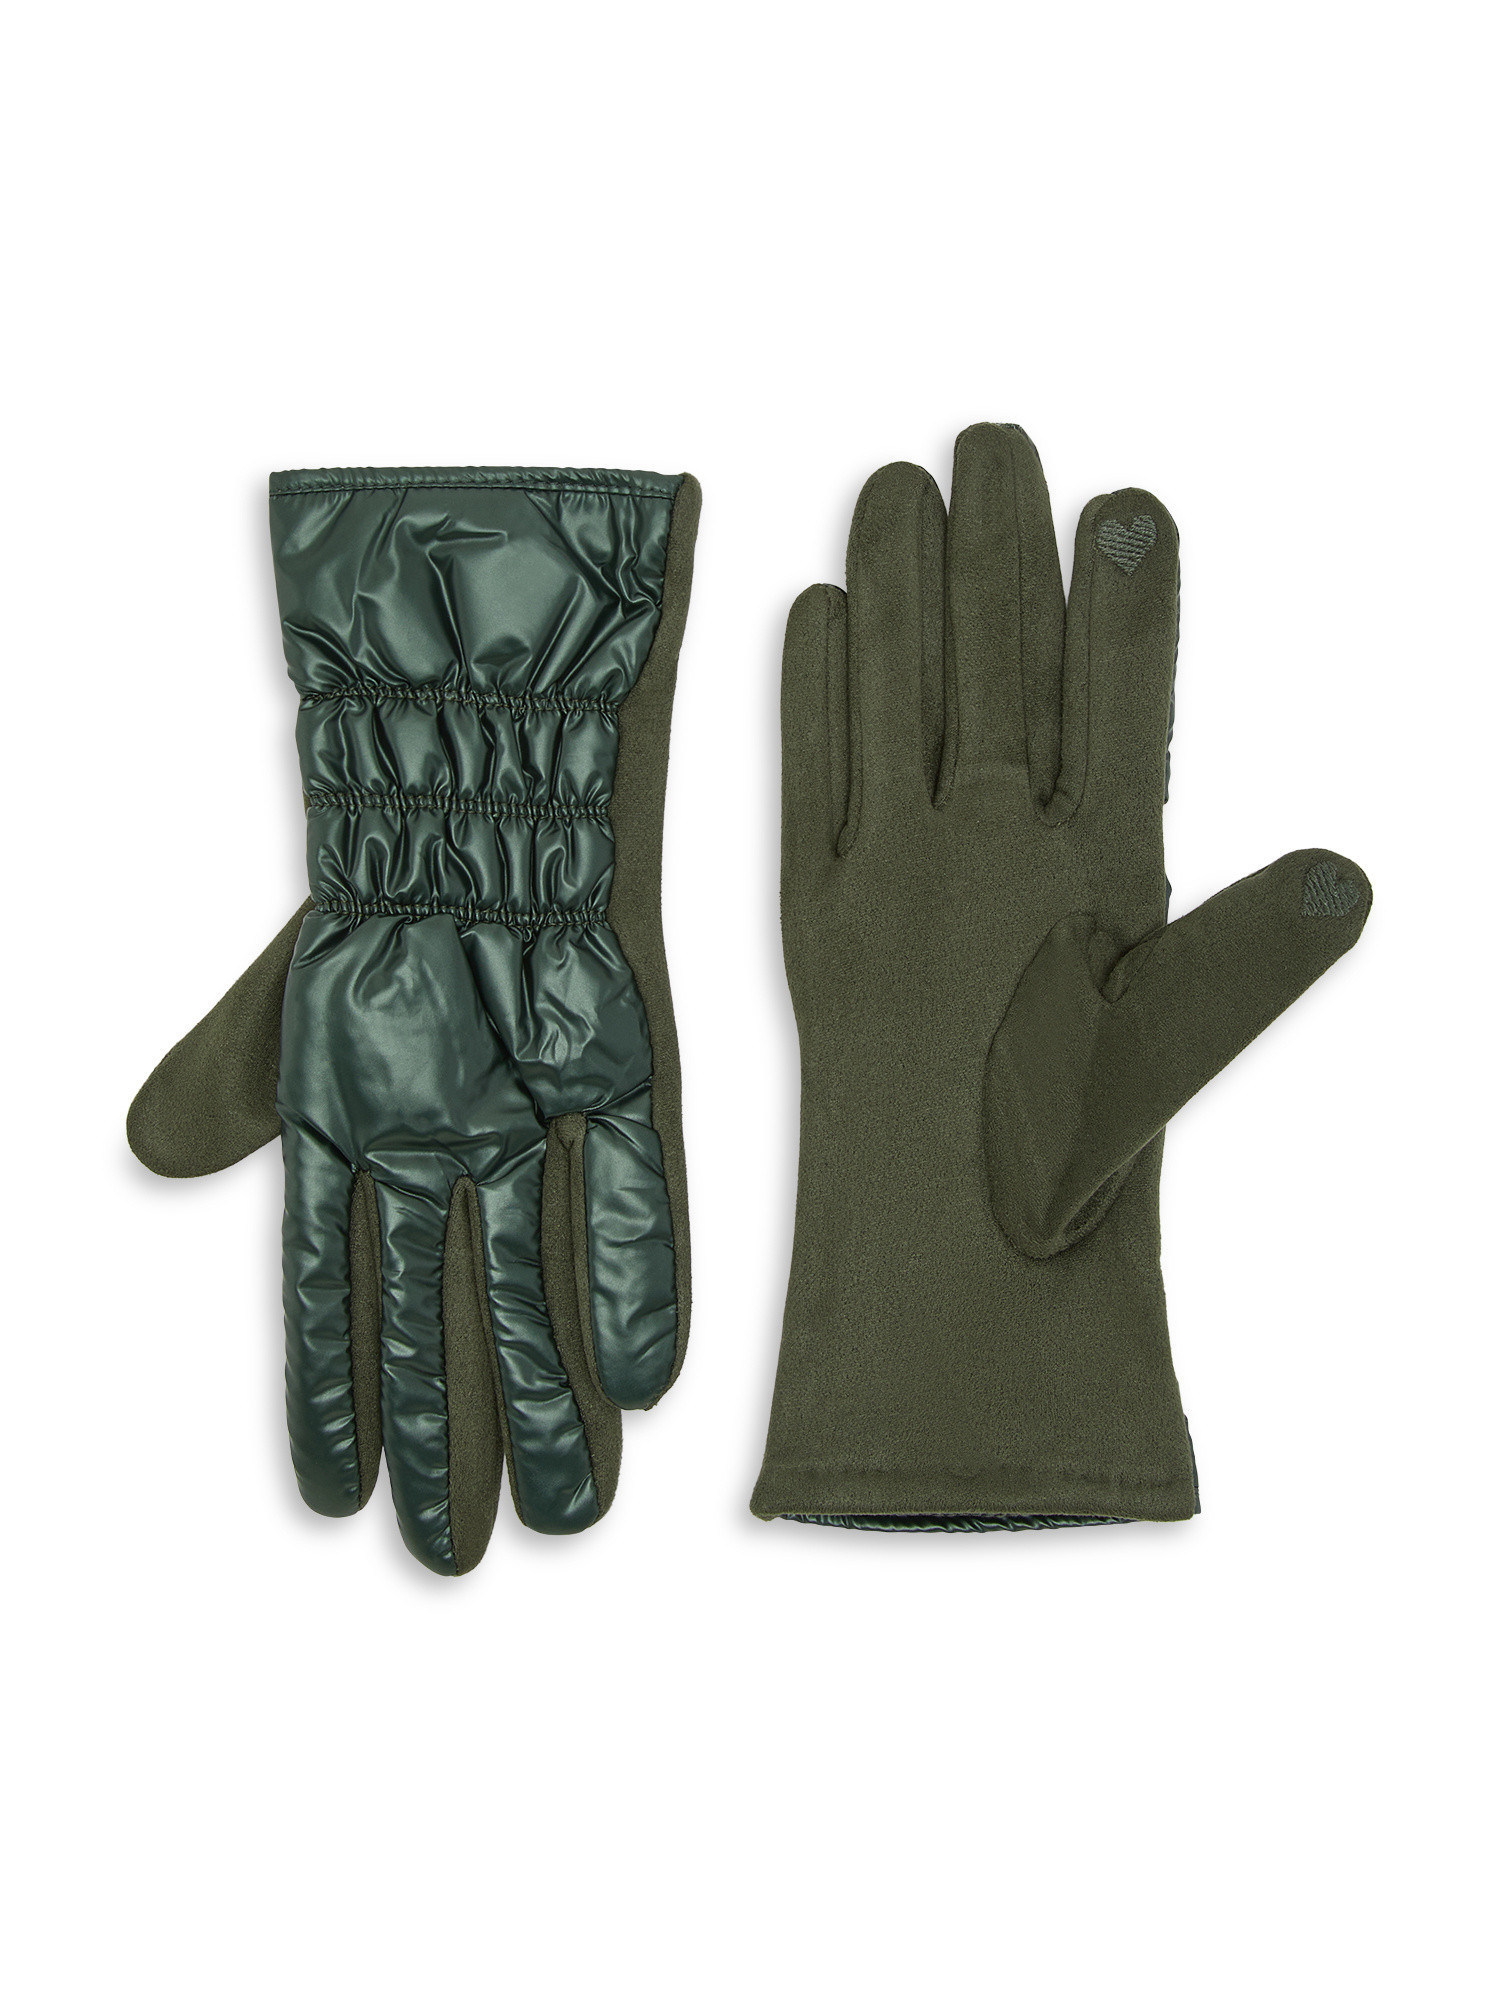 Koan - Two-fabric gloves, Green, large image number 0